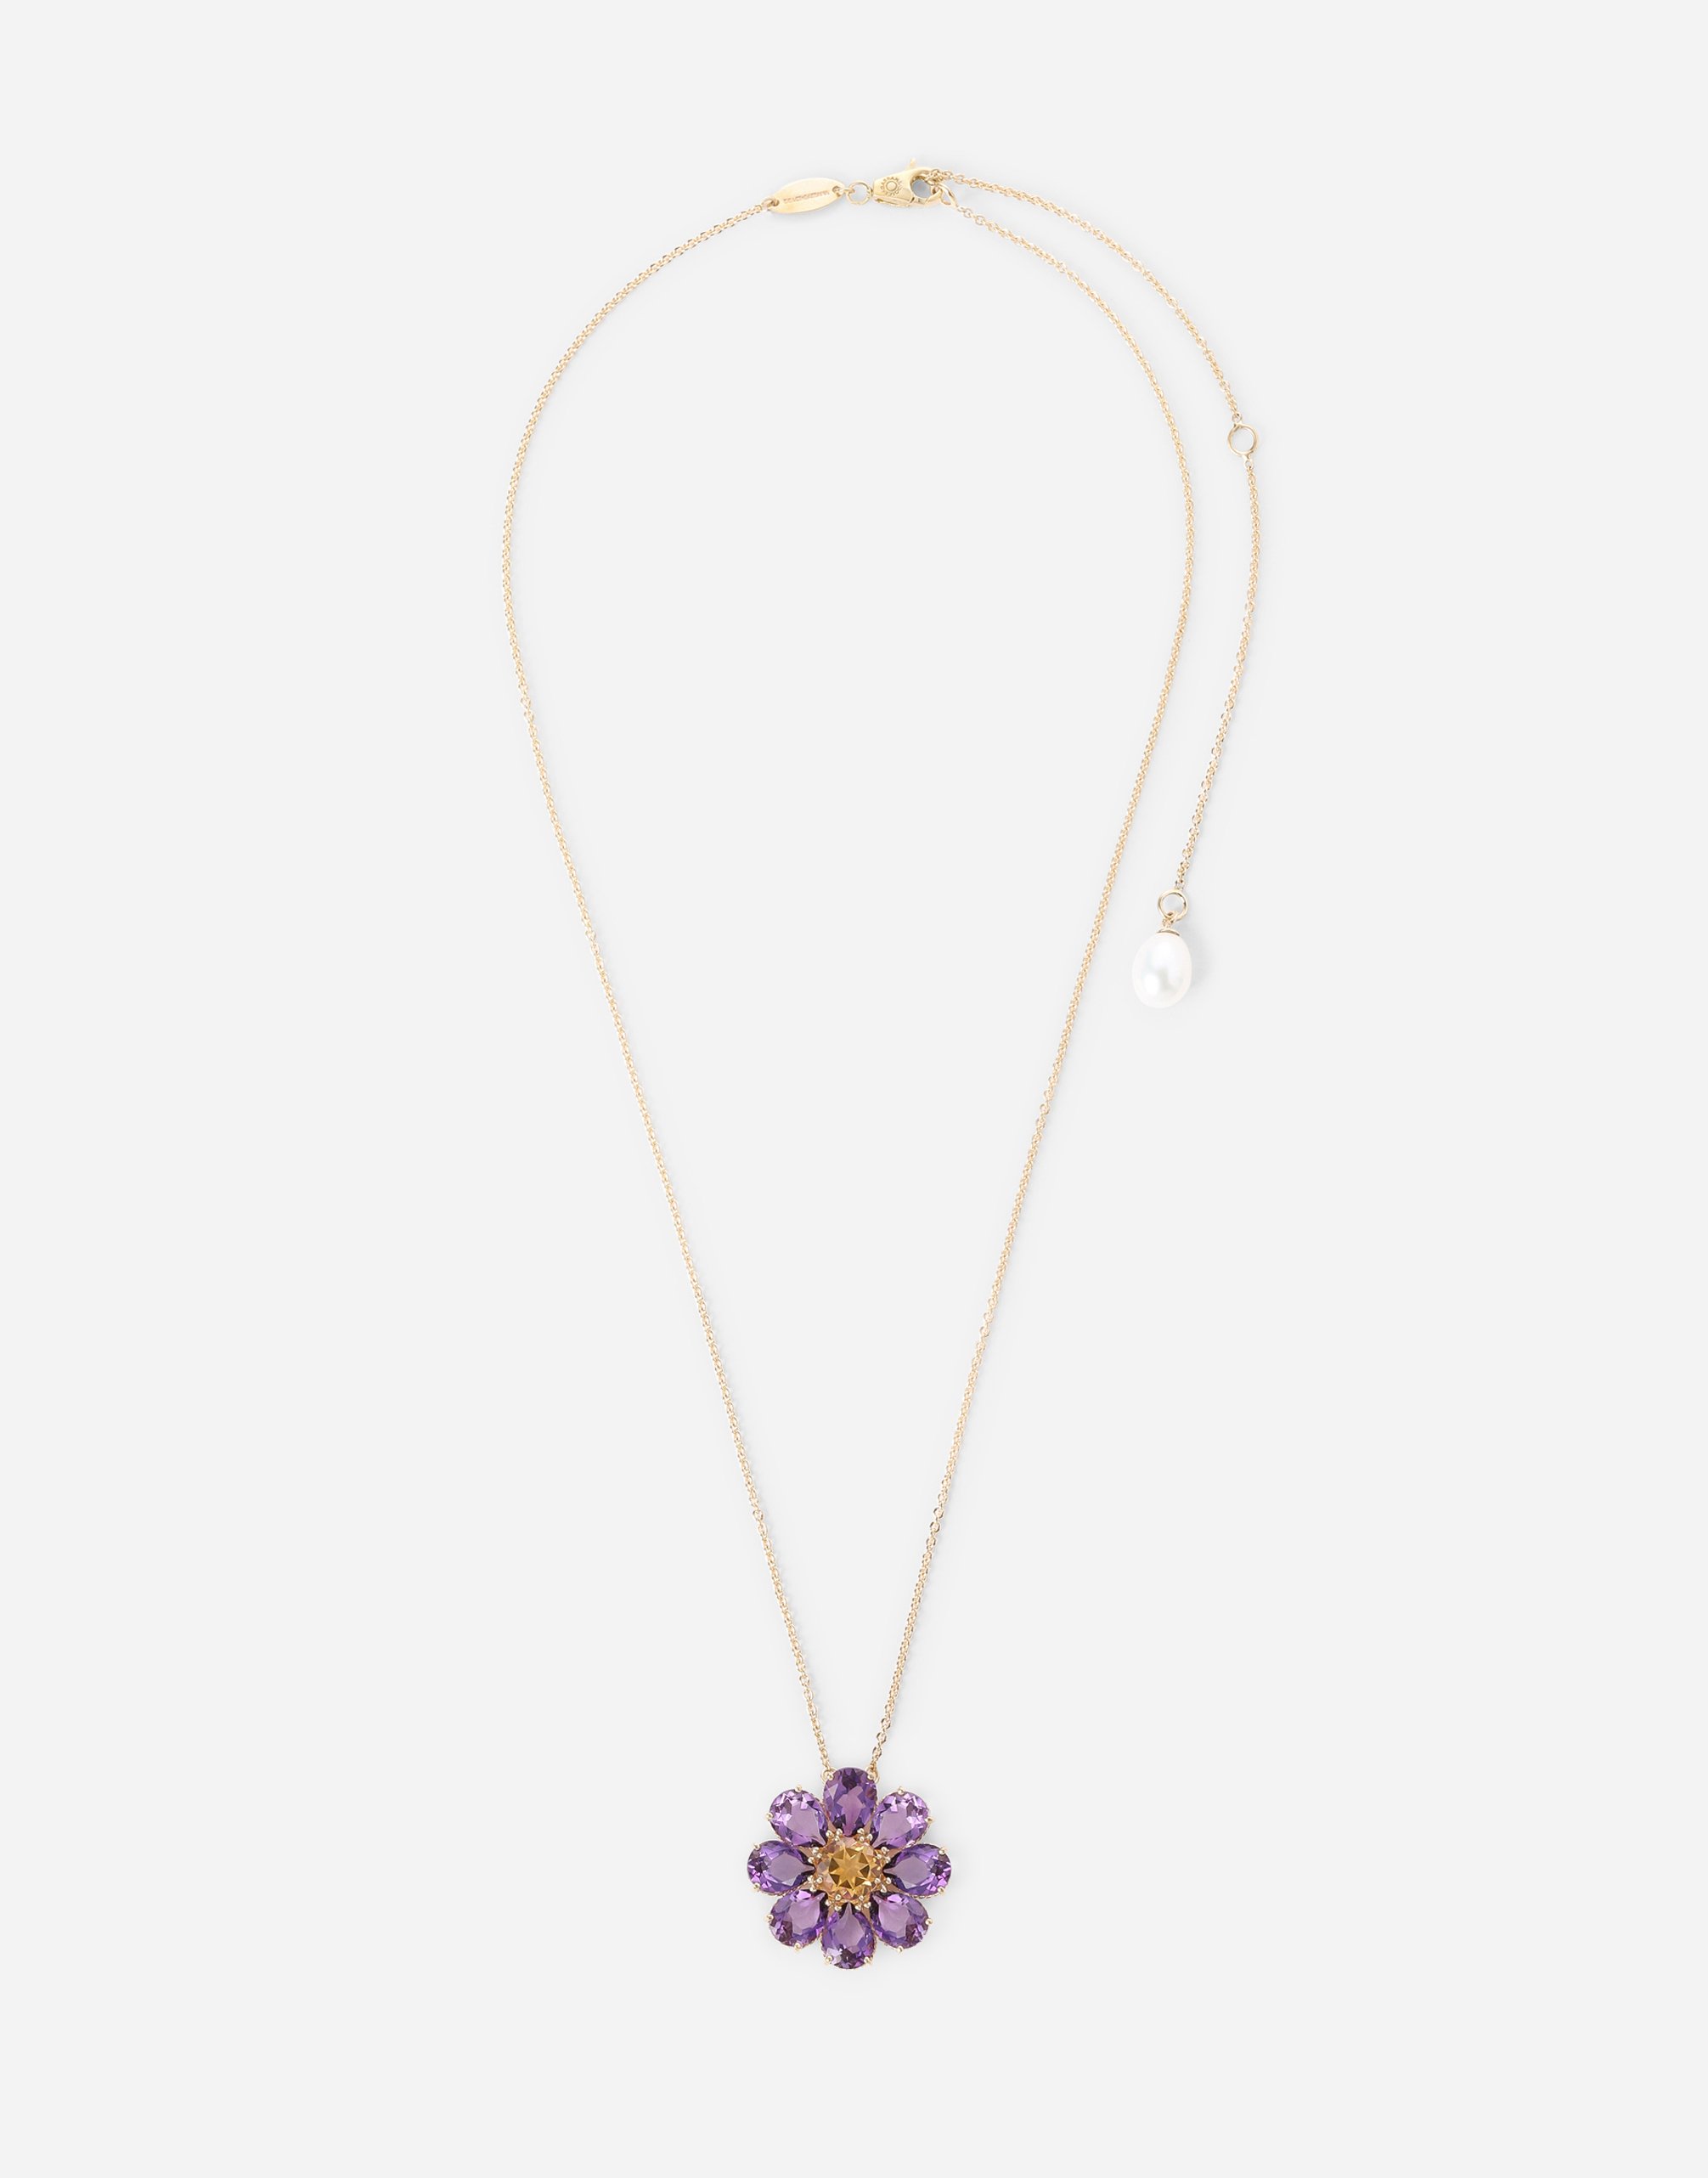 Dolce & Gabbana Spring Necklace In Yellow 18kt Gold With Amethyst Floral Motif Gold Female Onesize